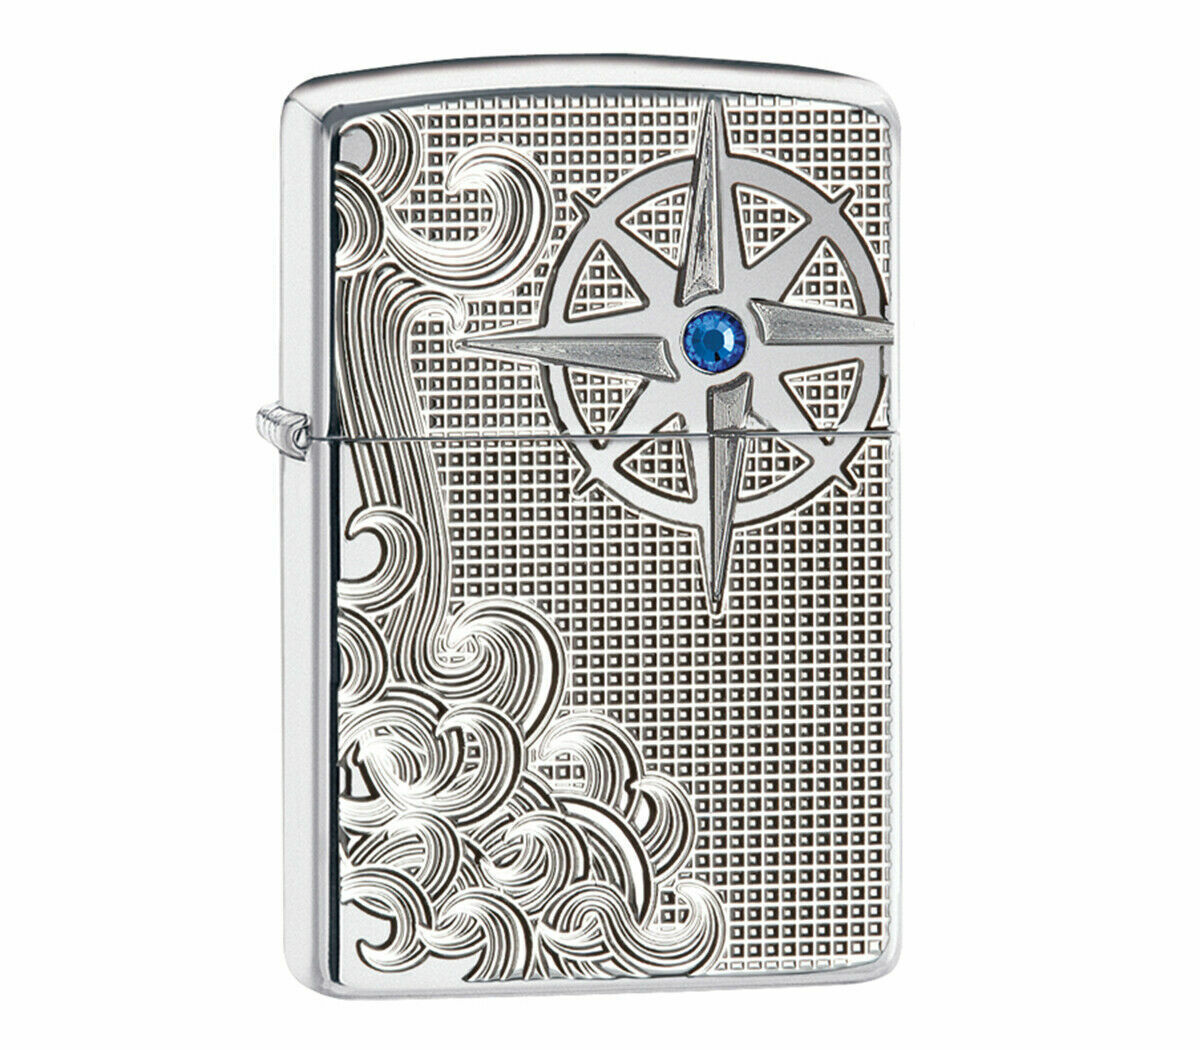 Zippo Armor Luxury Waves Lighter, Deep Carved With Crystal, 28809, New In Box